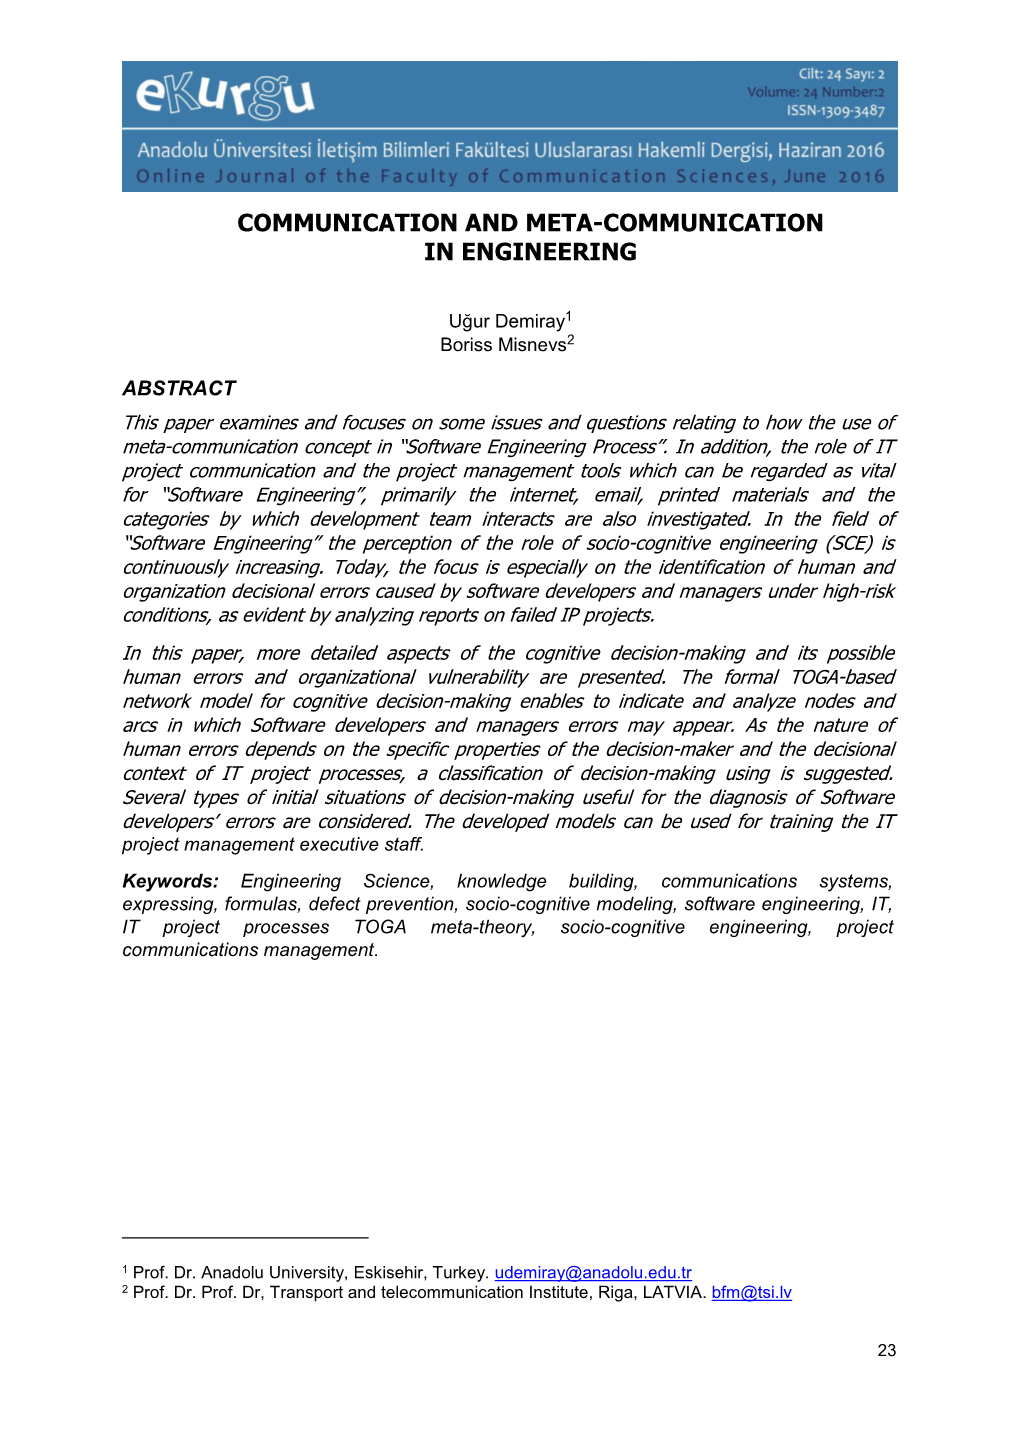 Communication and Meta-Communication in Engineering